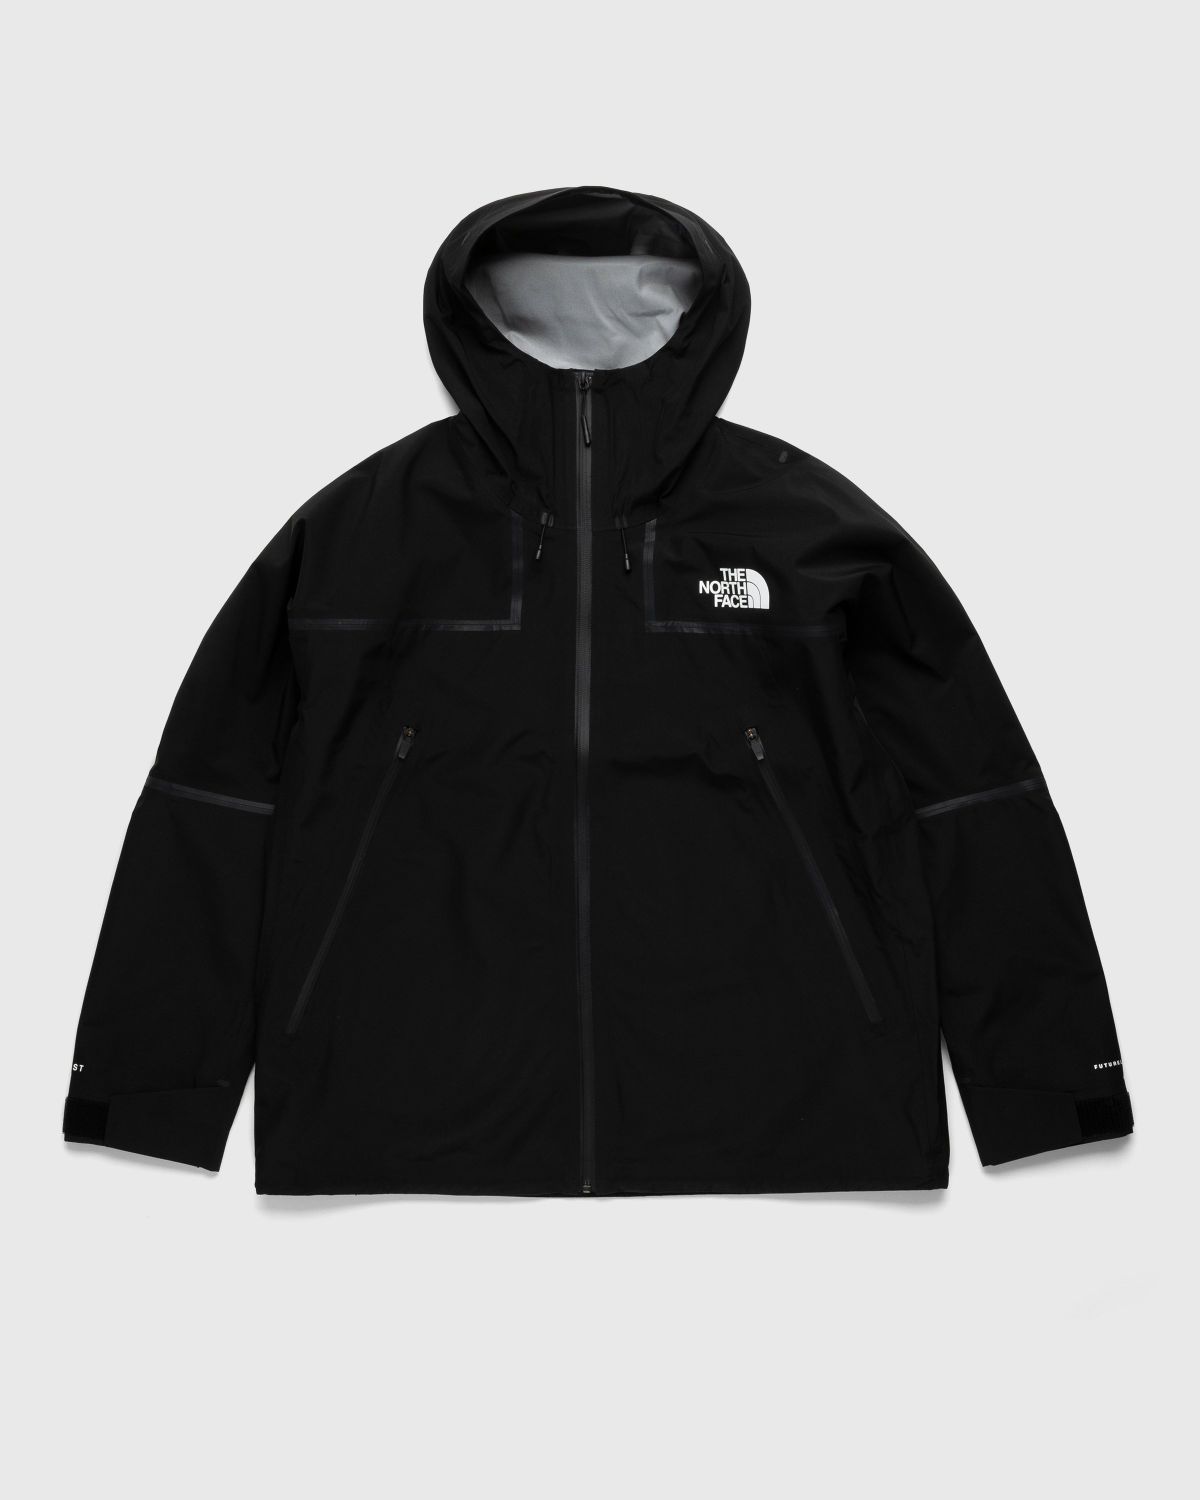 The North Face – RMST Mountain Light Futurelight Triclimate Jacket Black